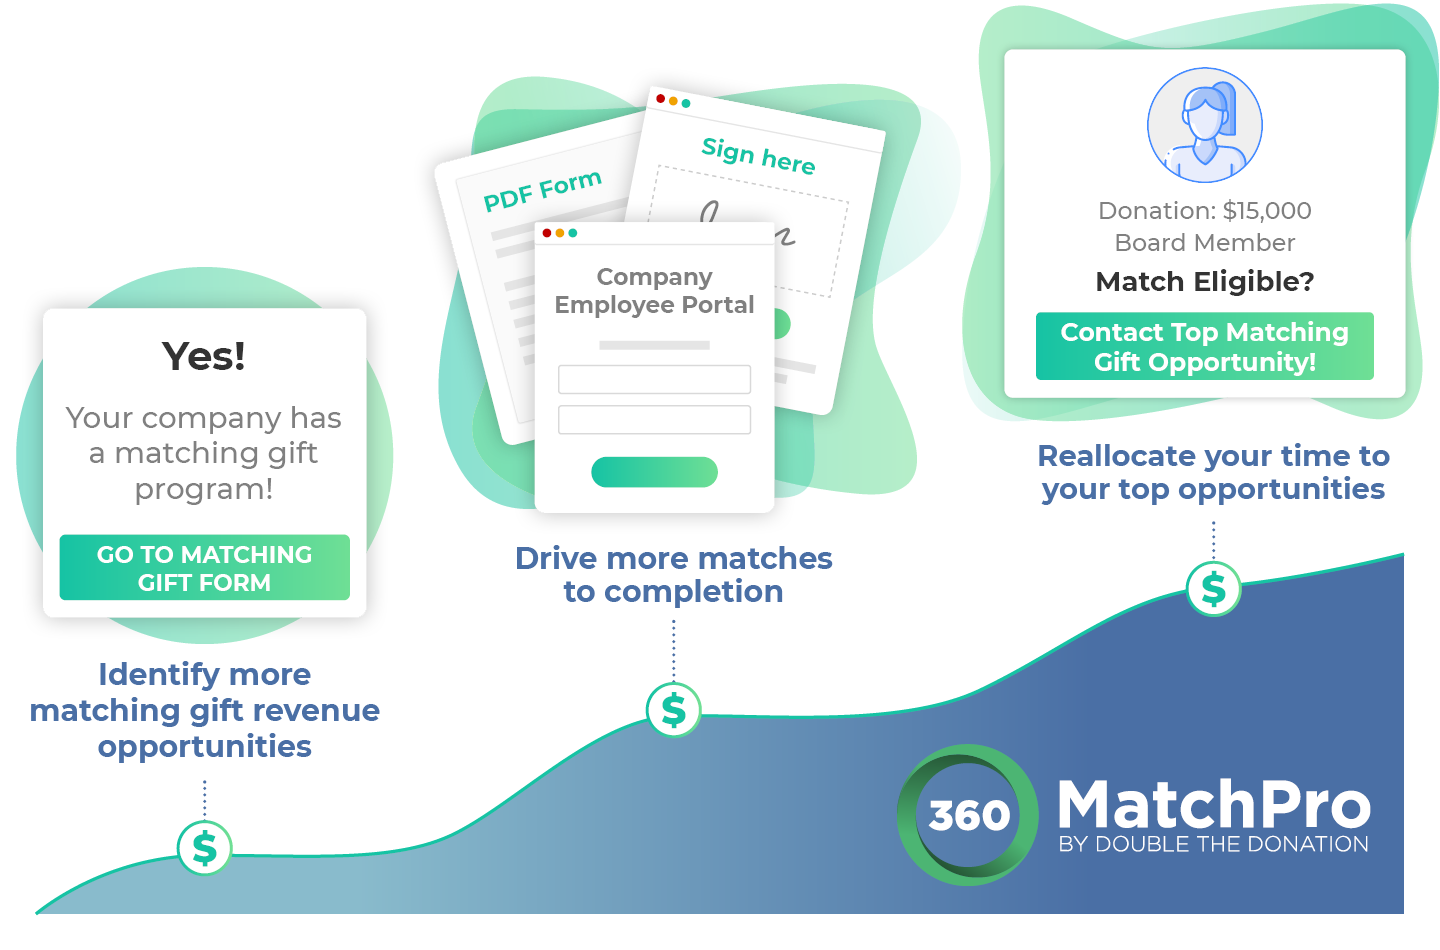 This image shows an increasing line graph along with 360MatchPro gift matching features.